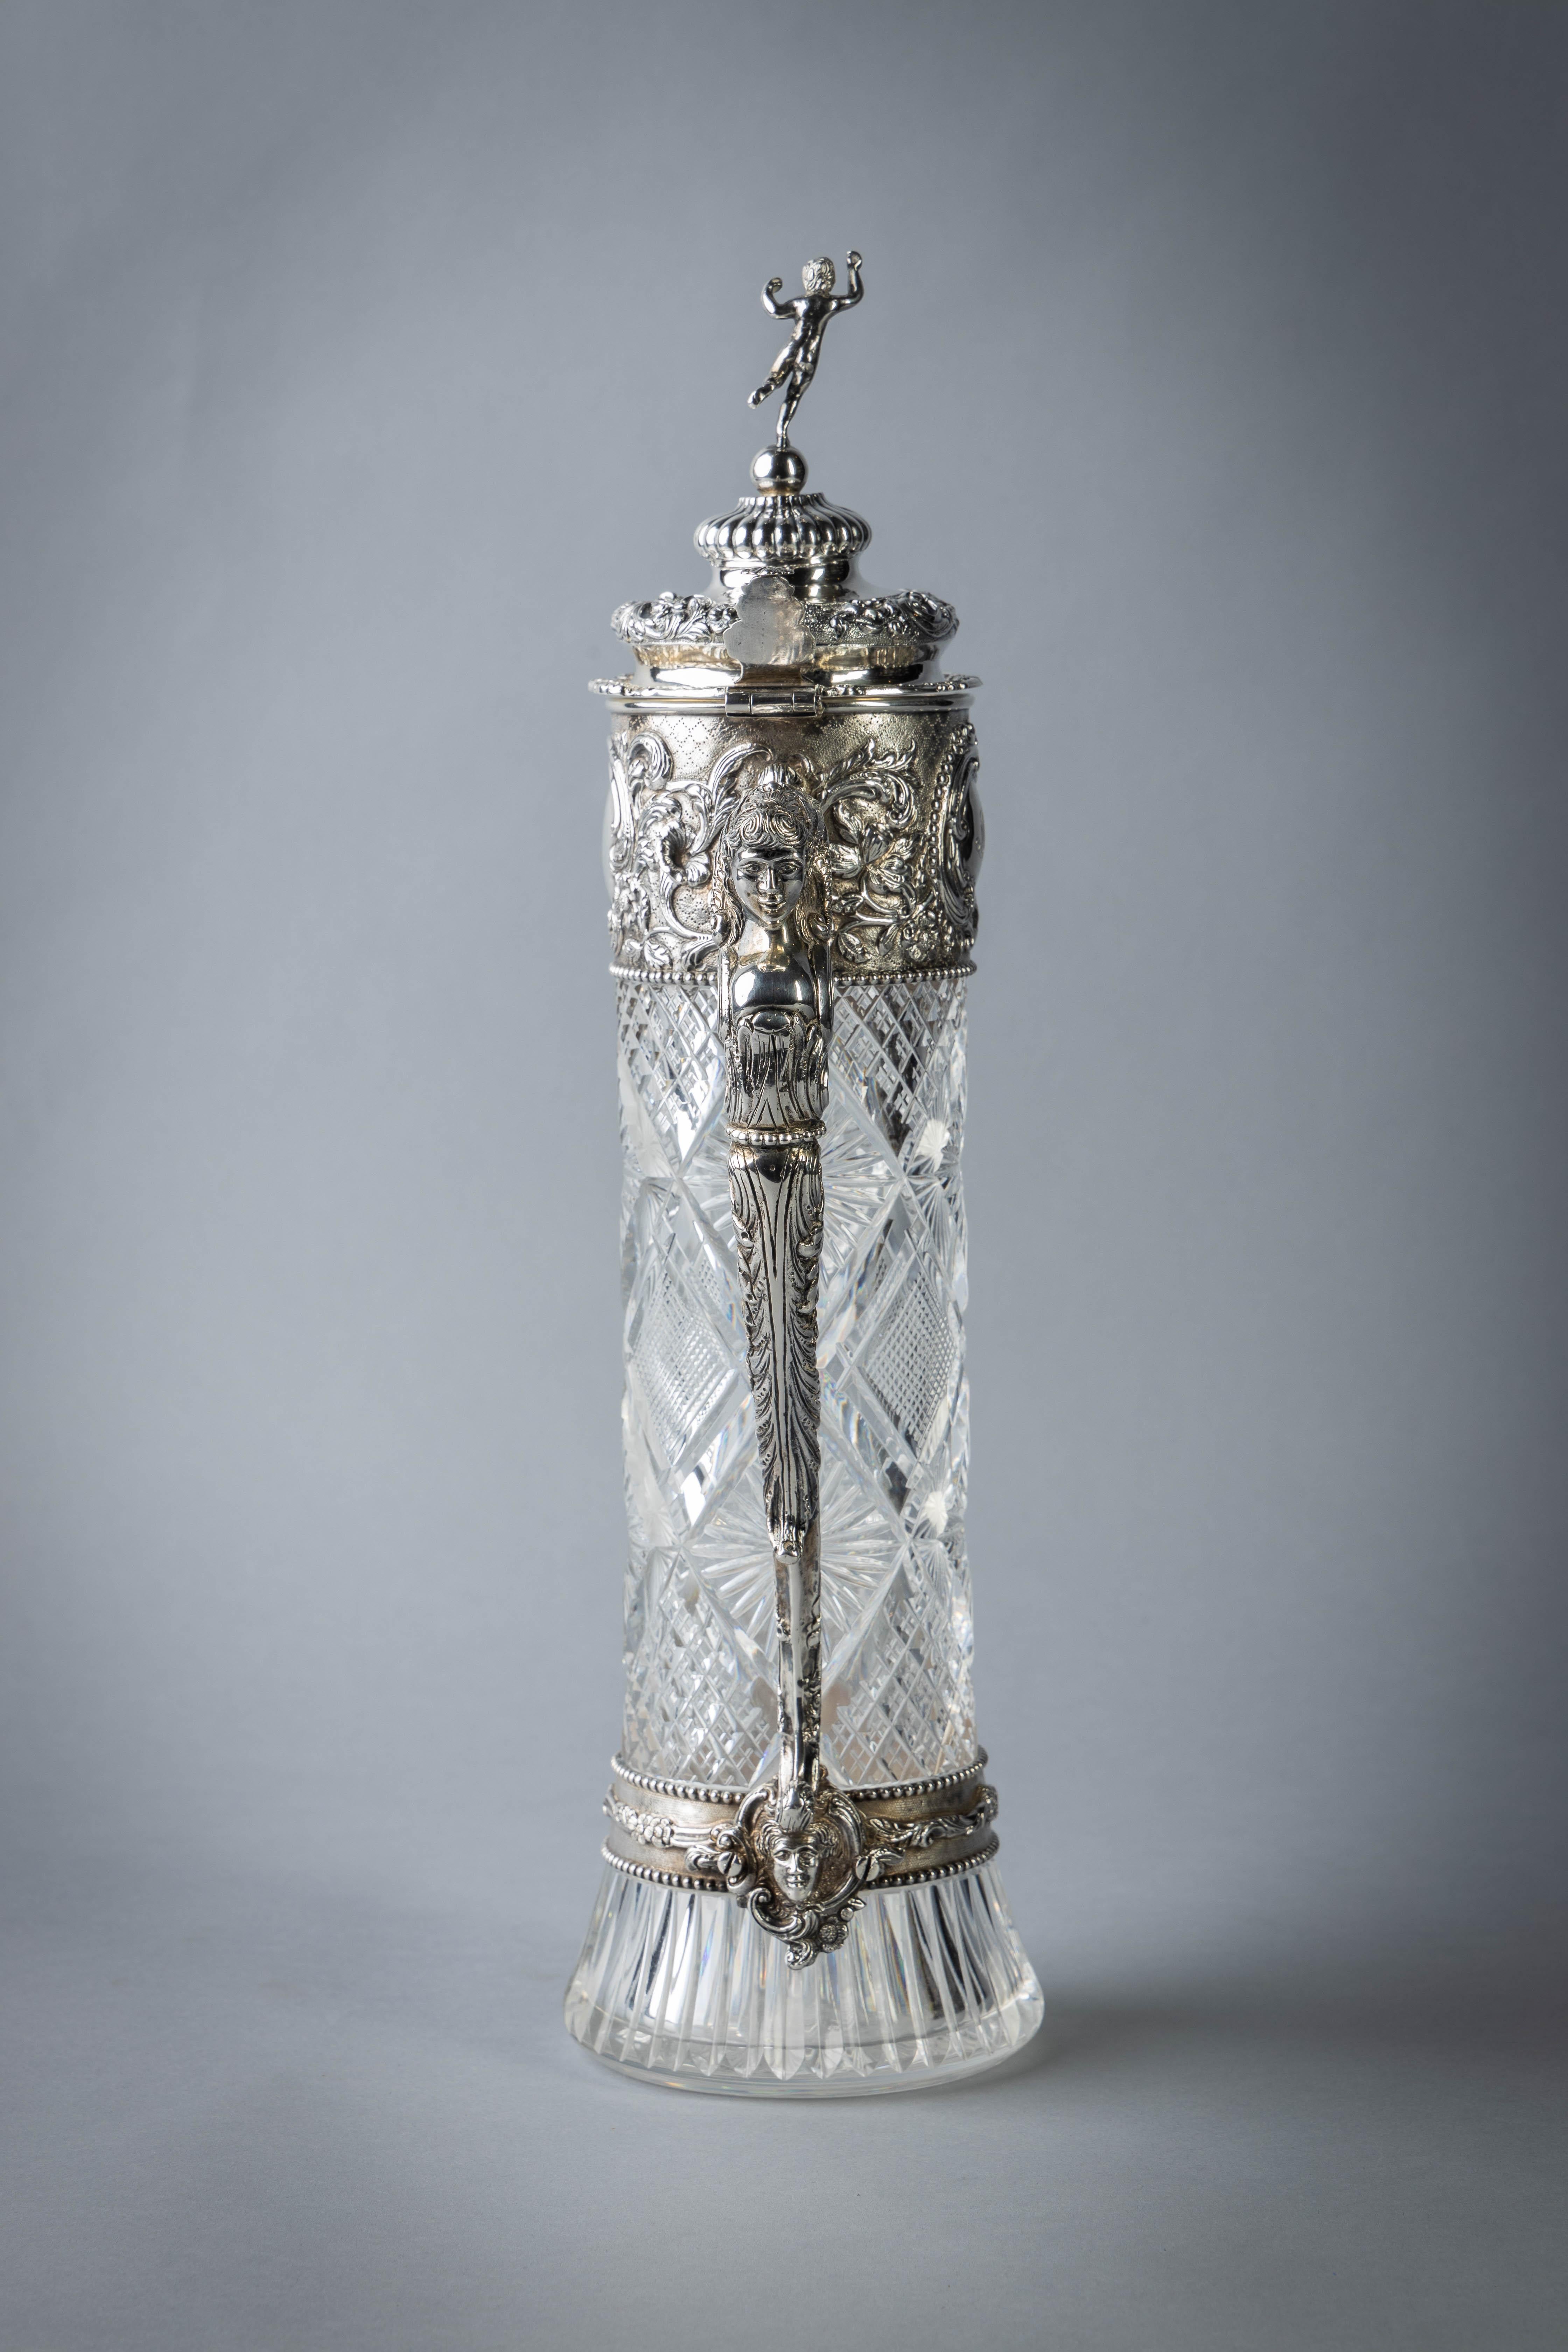 The glass body with vari-cut motifs, the silver with finely chased decoration with mask head spout and handle, the finial with putti standing on ball. Monogram within cartouche.